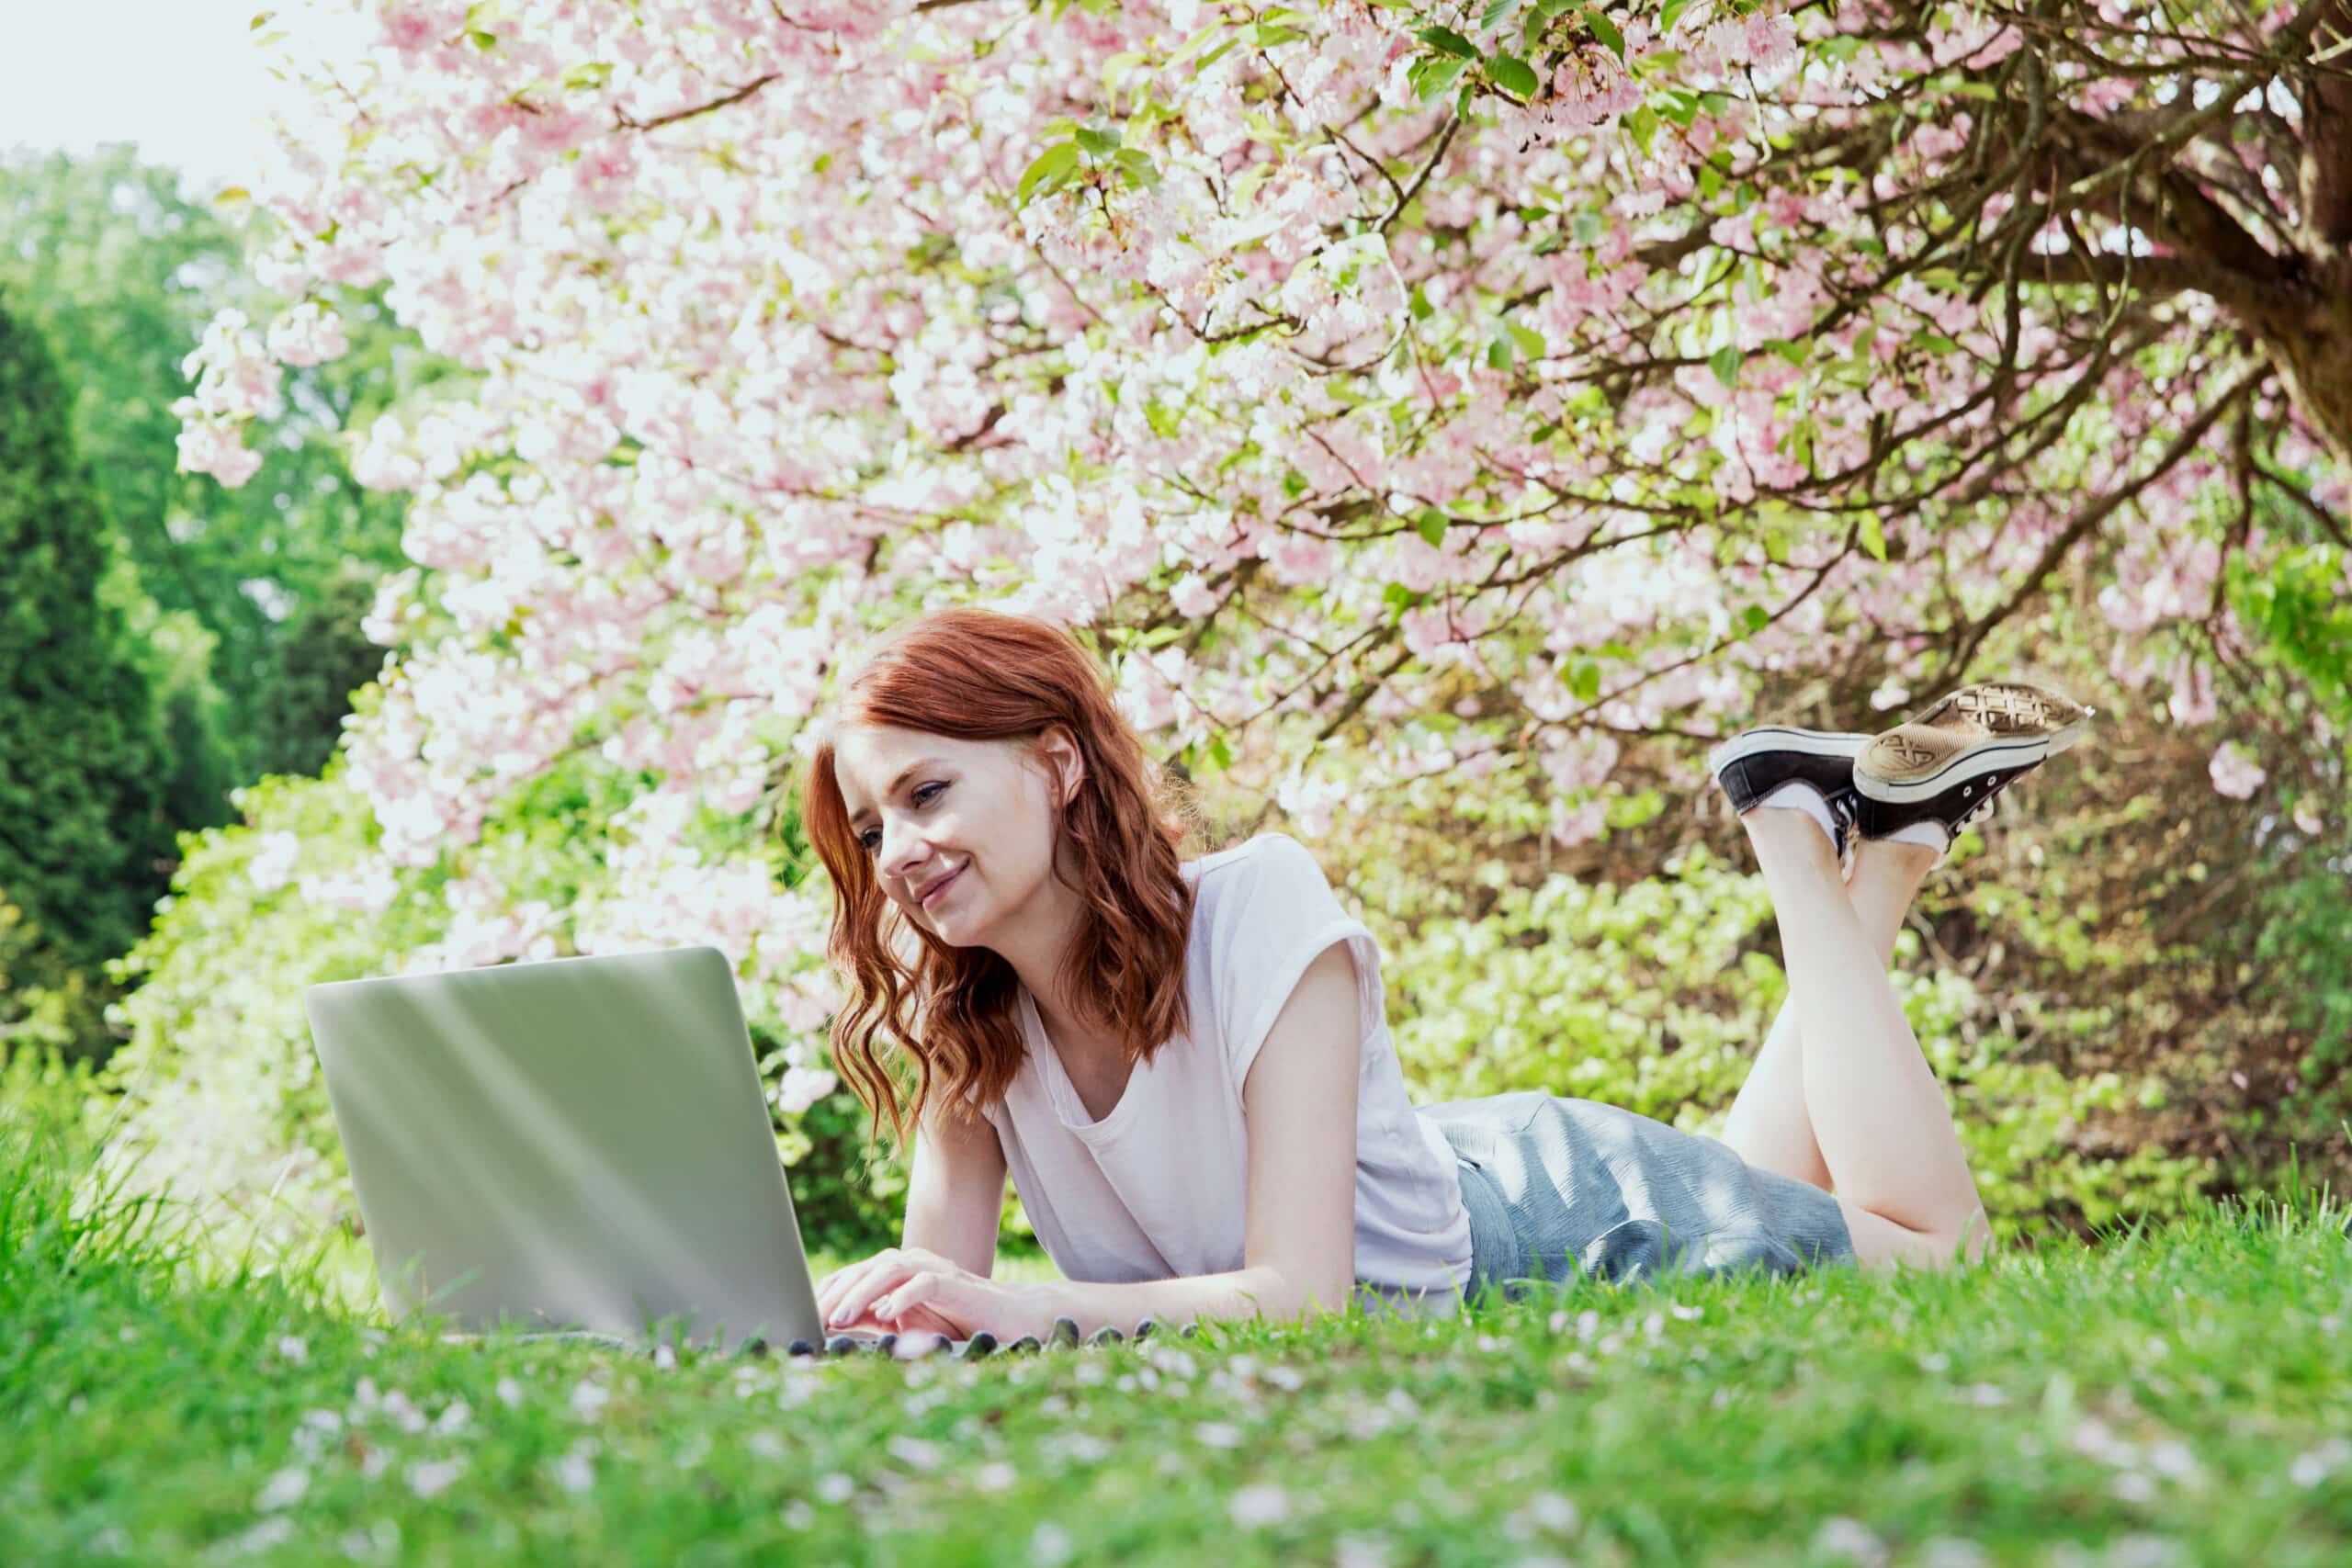 smiling redhead girl working on her laptop in cherry blossom tree garden